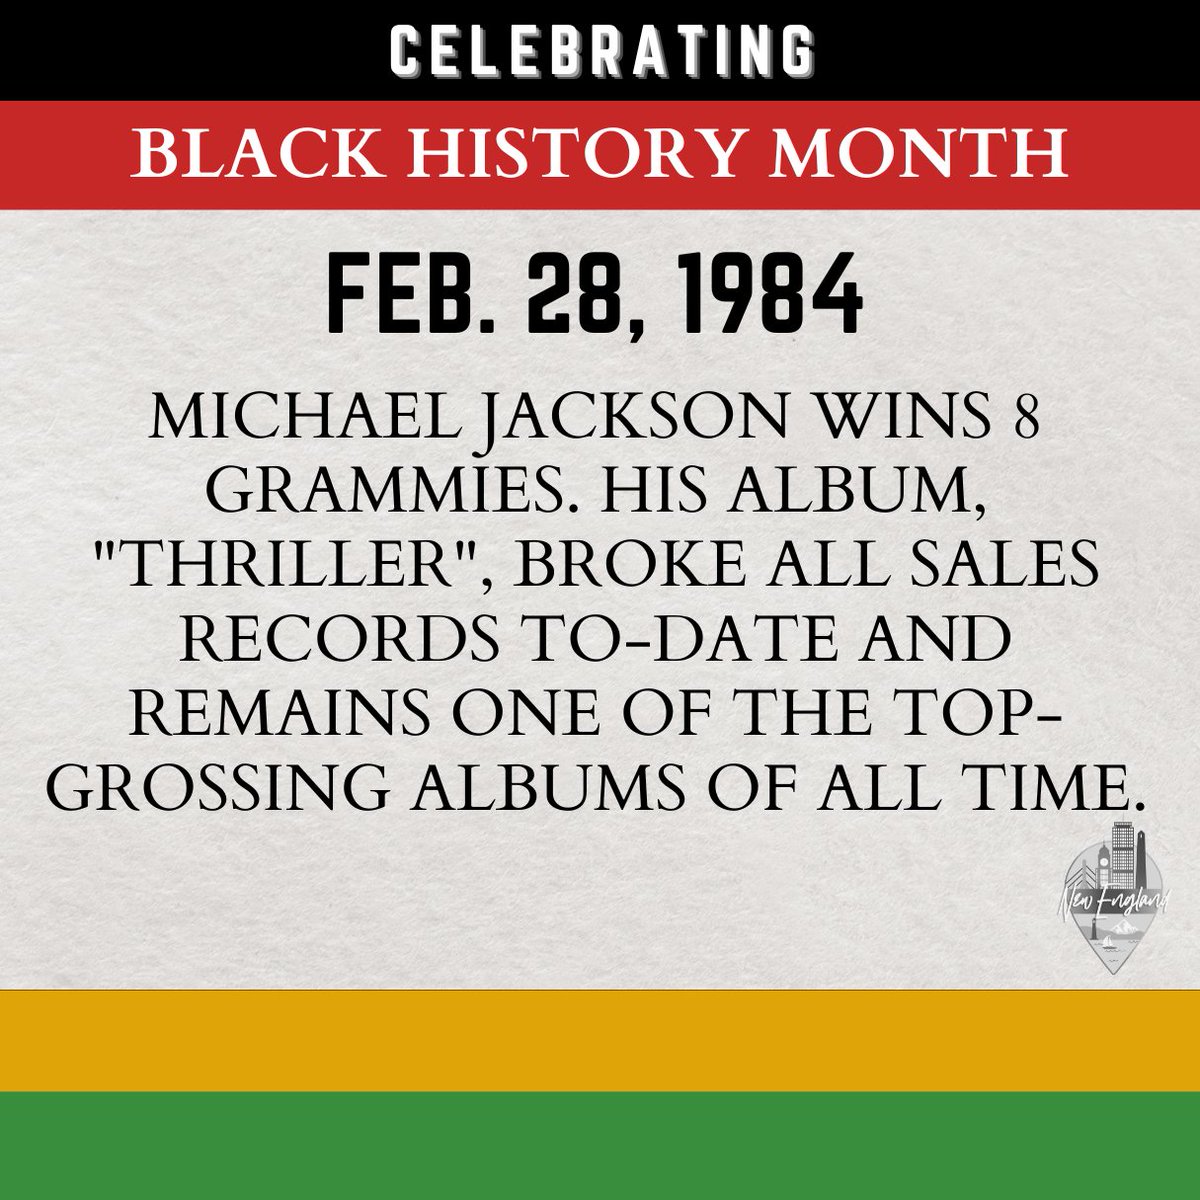 Today in history, we celebrate an amazing accomplishment in the world of music.